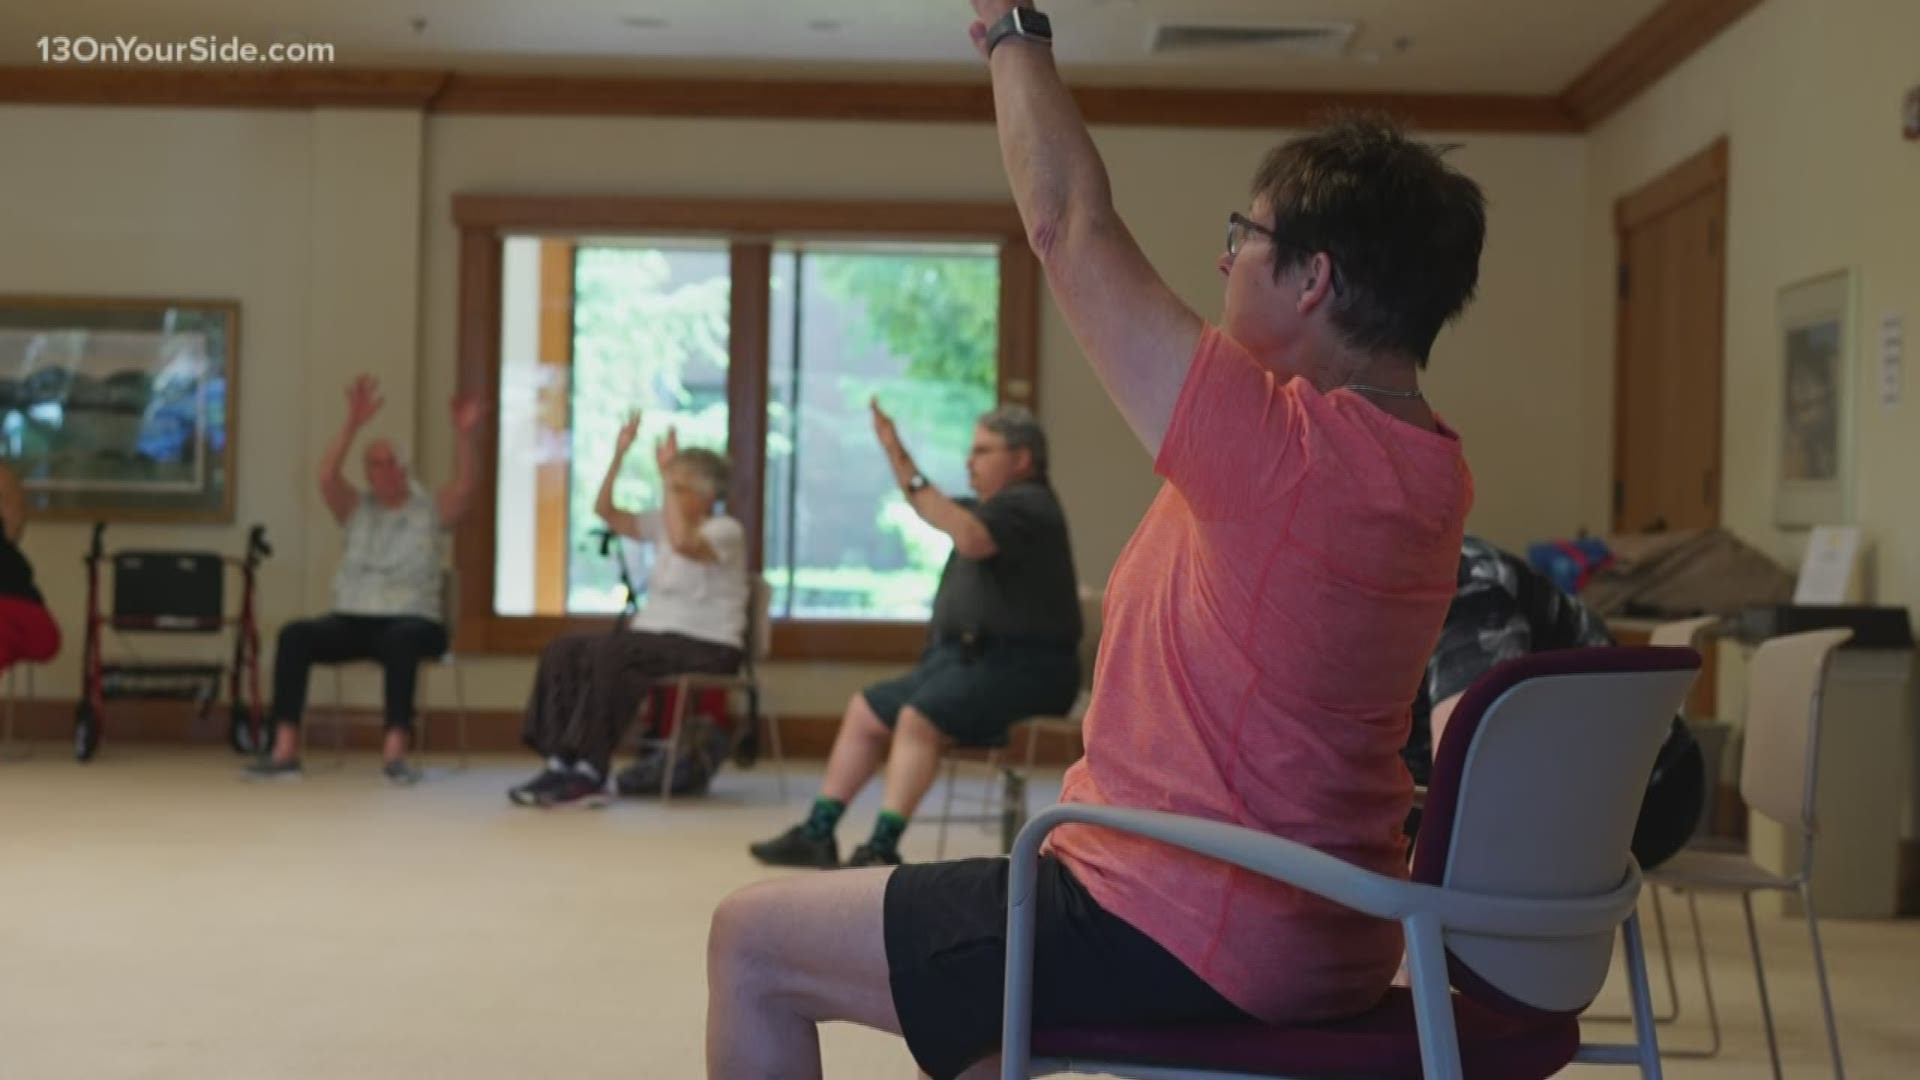 Residents at Holland Home will be putting on their dancing shoes and take ballet classes at its Raybrook campus starting in October, once per week for the next year.